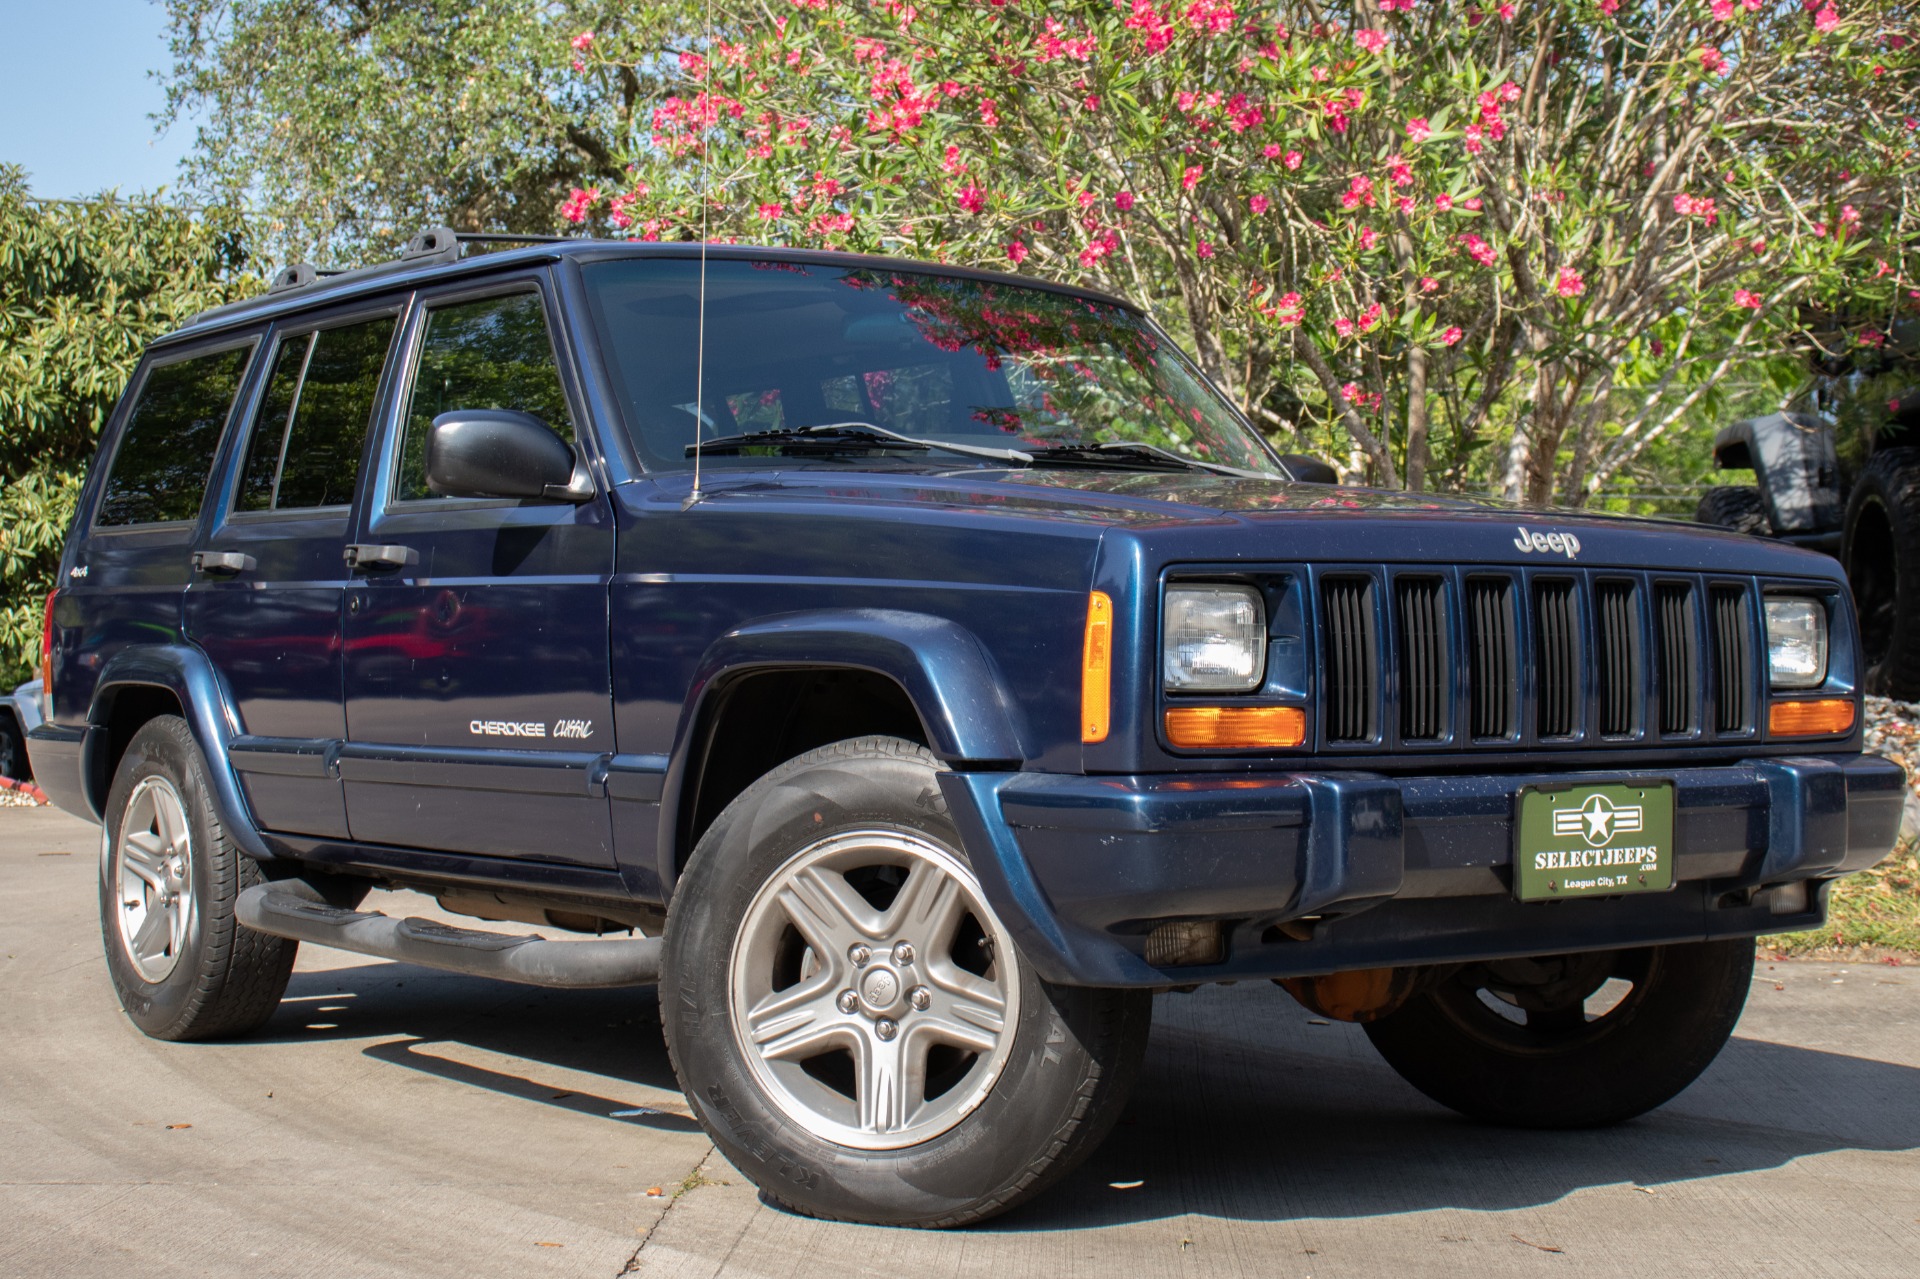 Used 2000 Jeep Cherokee Classic For Sale 7995 Select Jeeps Inc